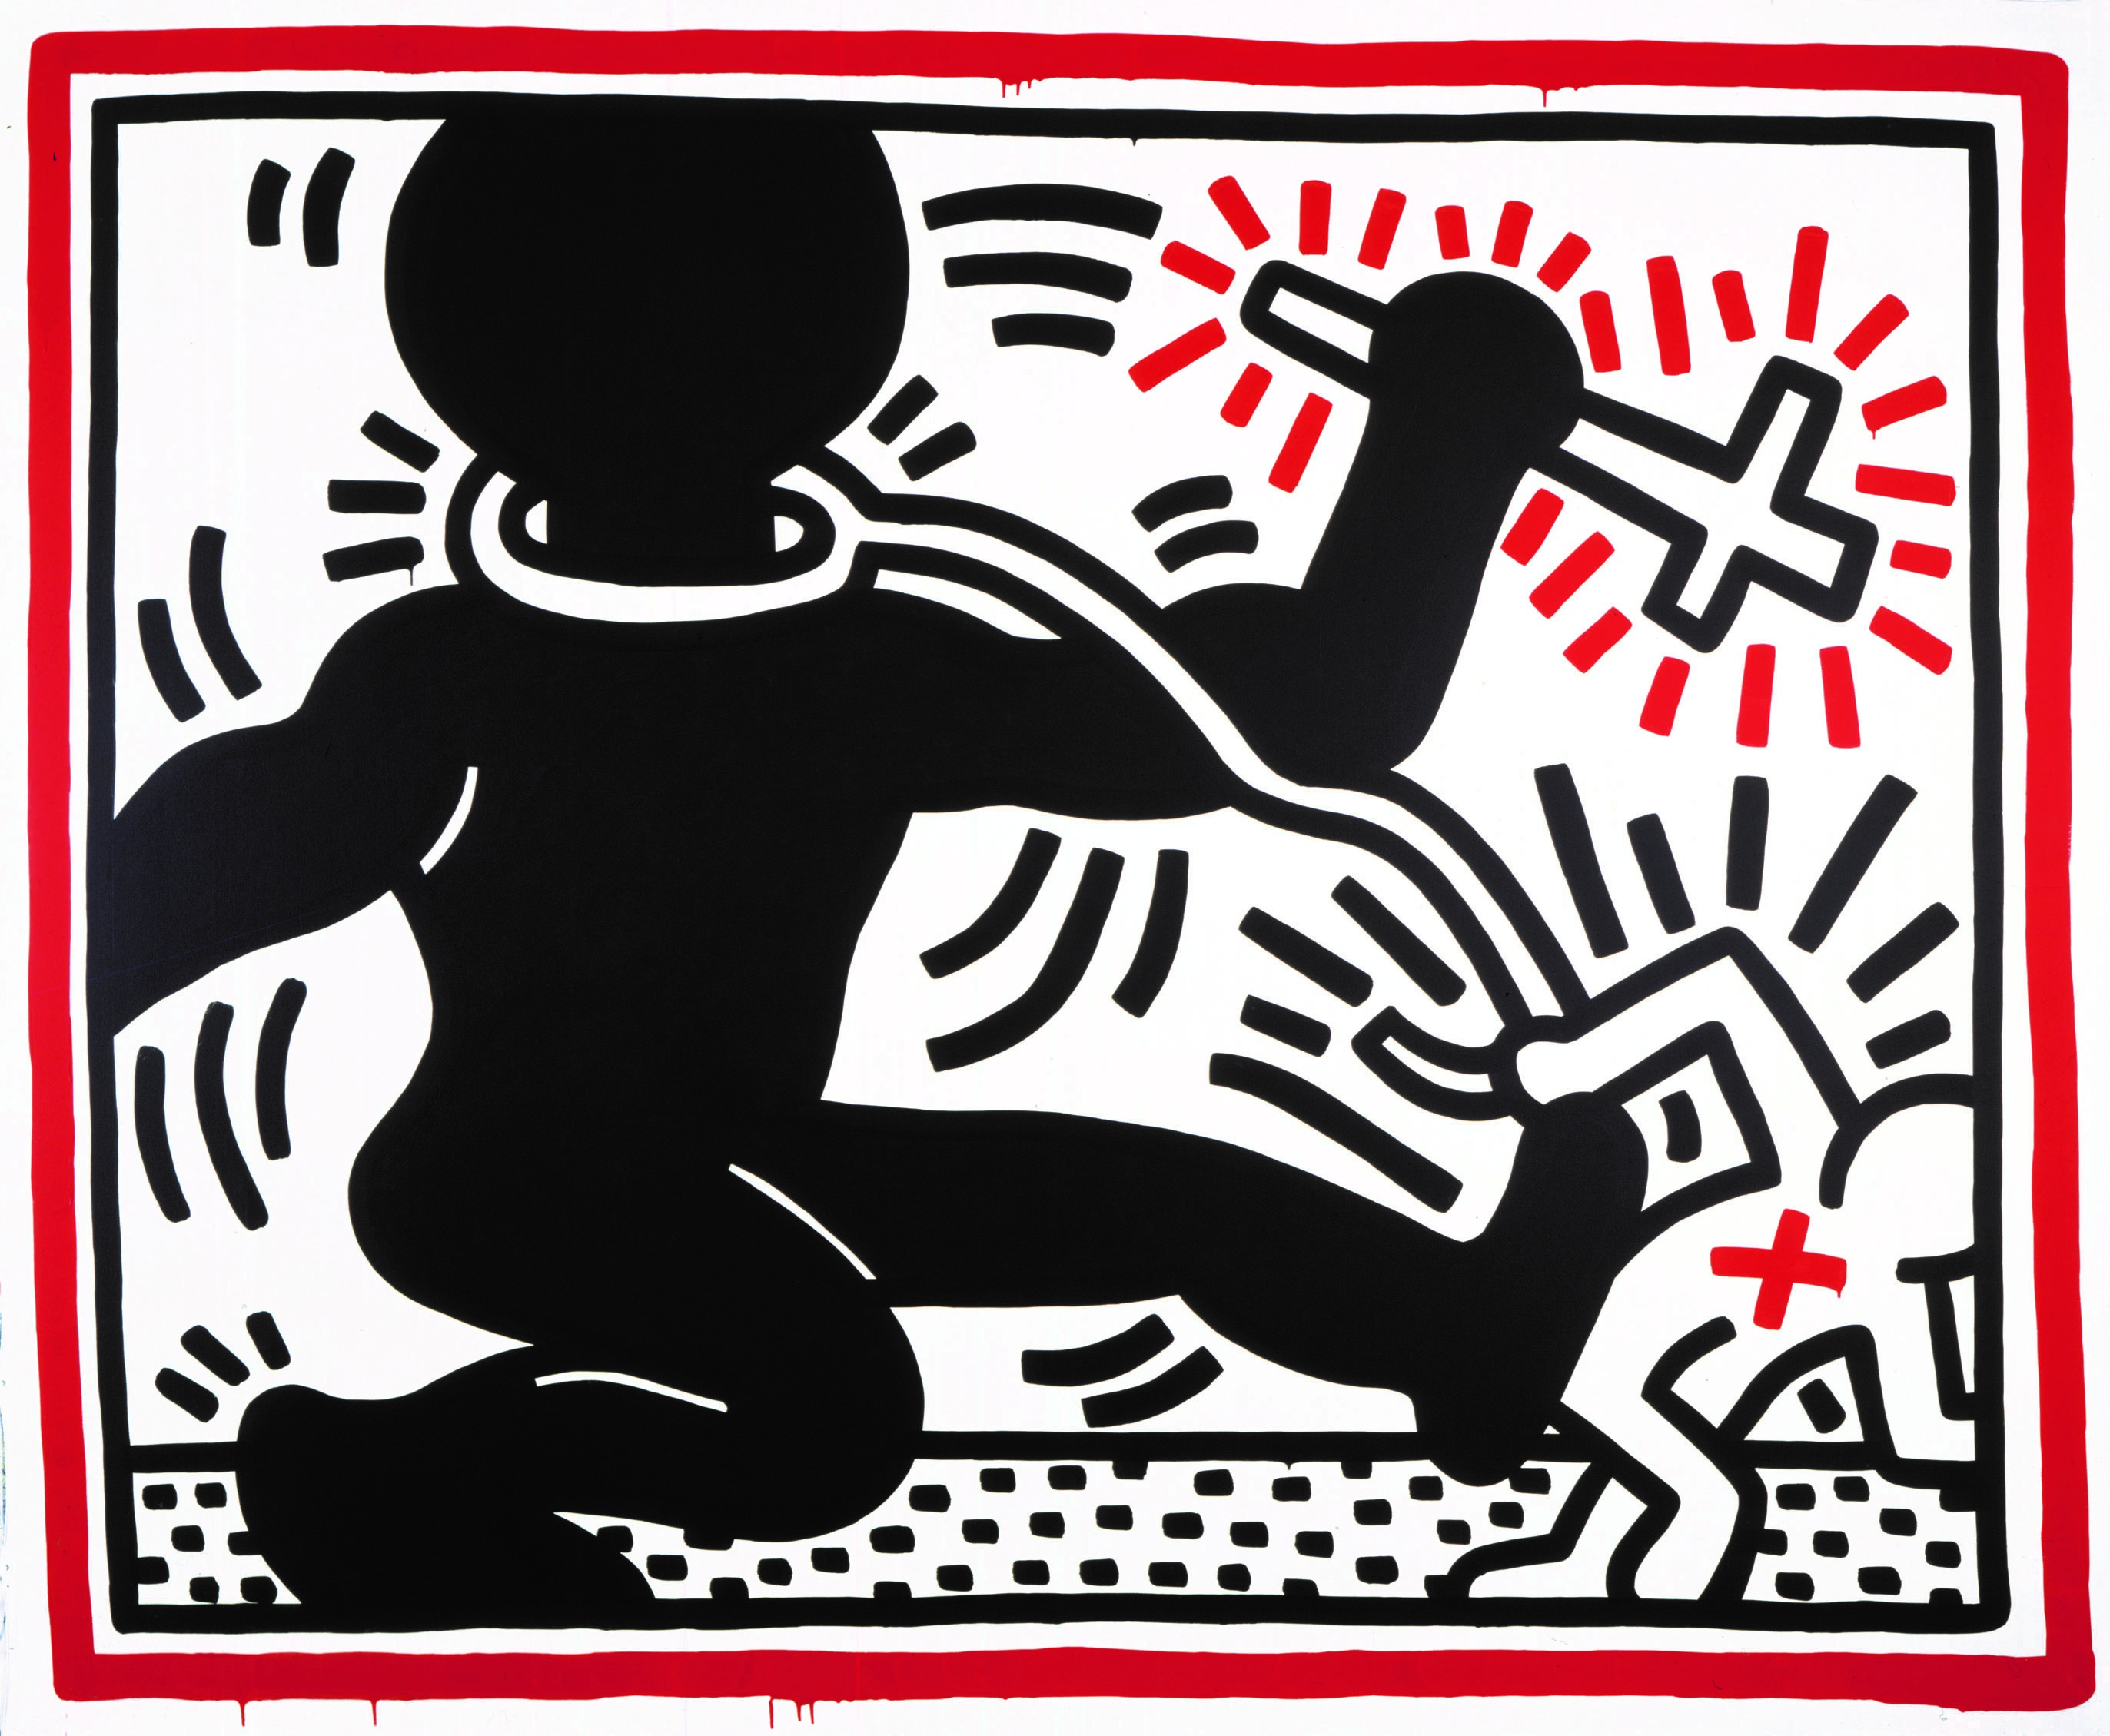 Work by Keith Haring will go on show at Tate Liverpool (Untitled, Keith Haring Foundation)